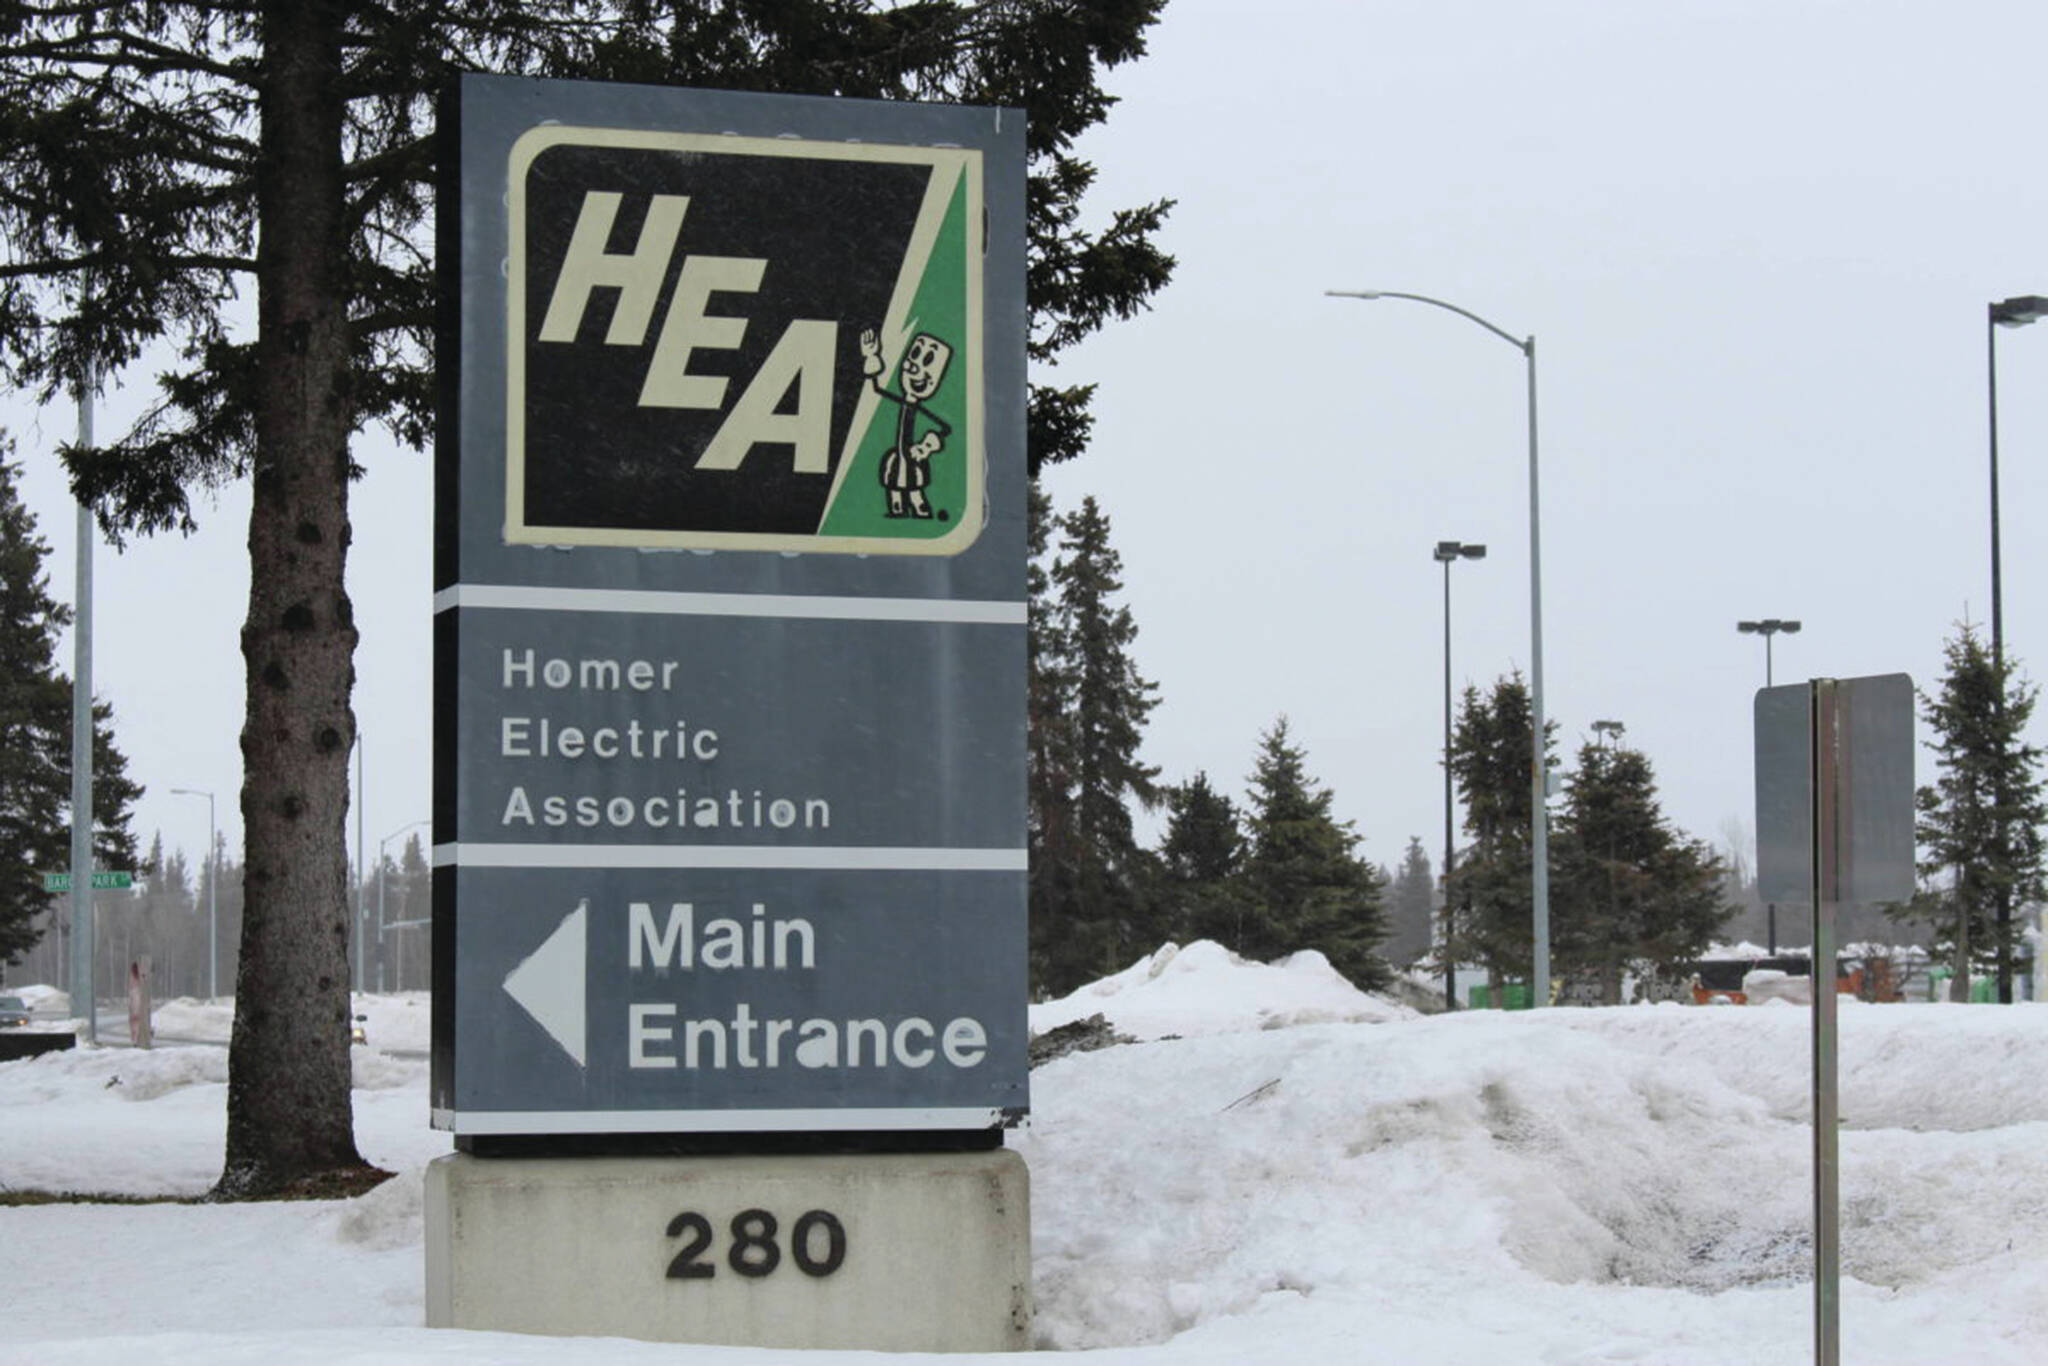 The sign in front of the Homer Electric Association building in Kenai, Alaska, as seen on April 1, 2020. (Photo by Brian Mazurek/Peninsula Clarion file)